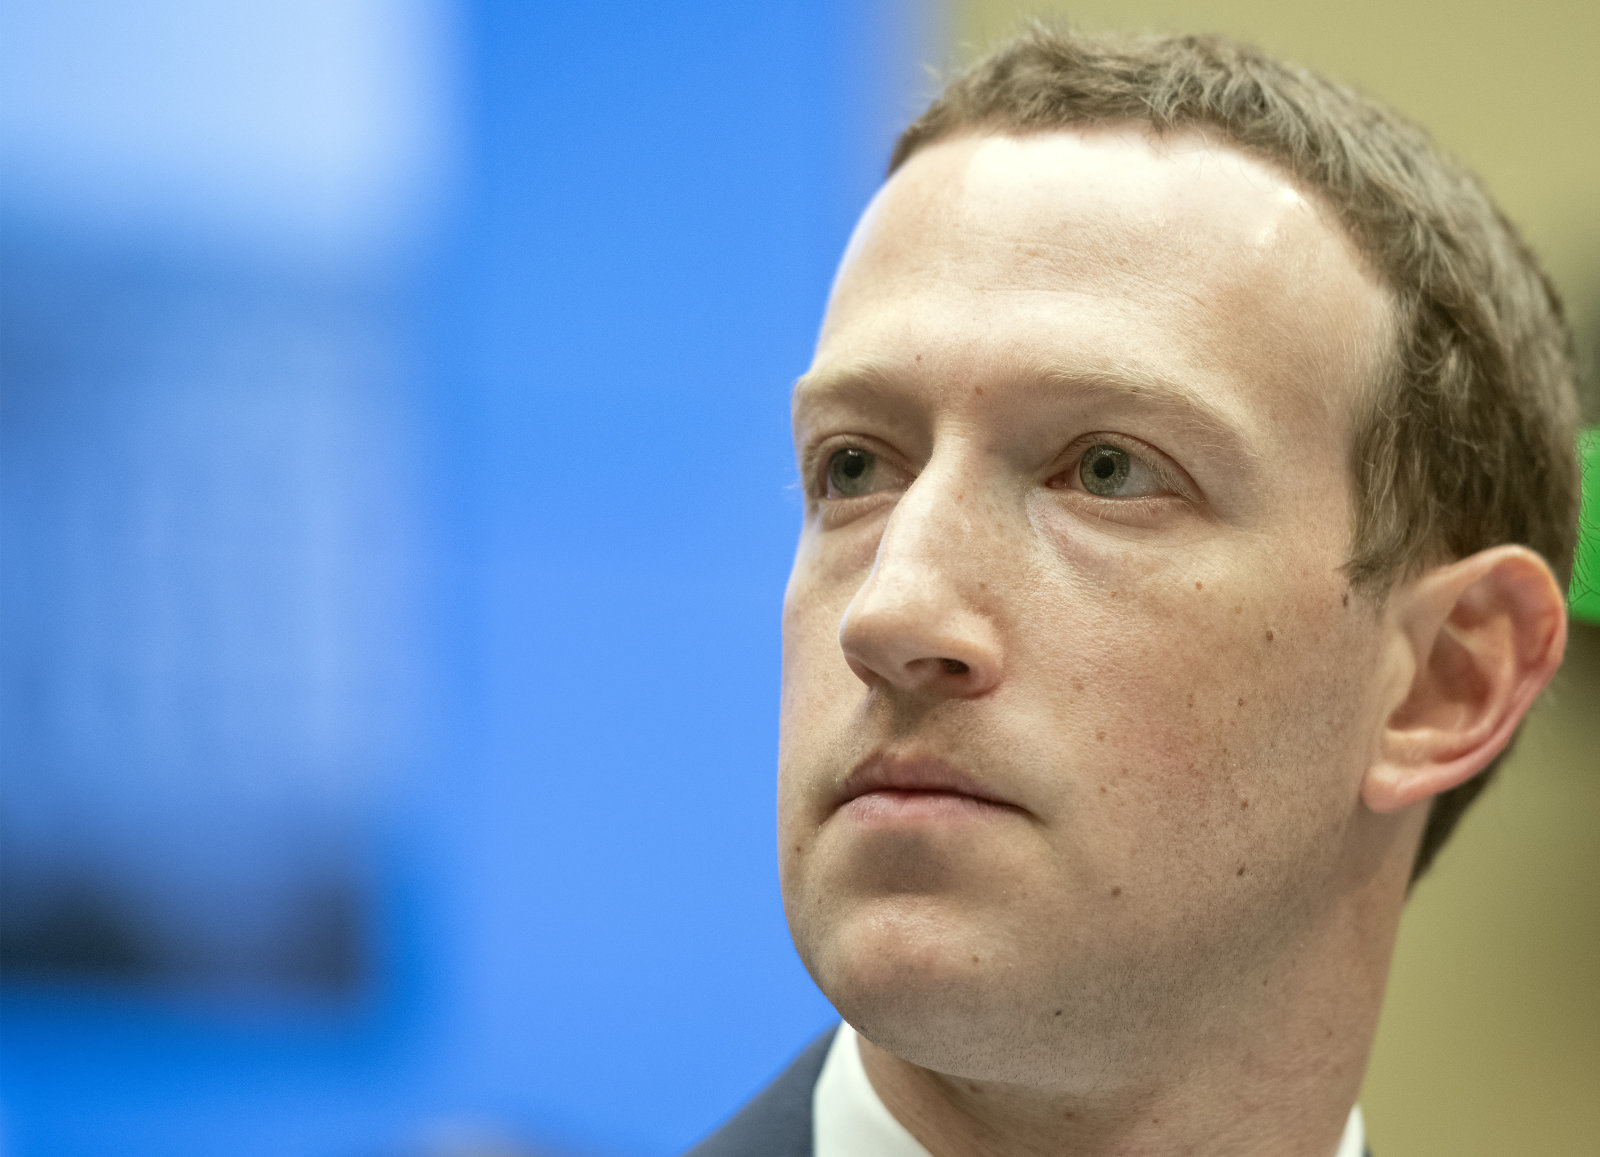 Zuckerberg says Facebook is at war, and it's causing executives to quit